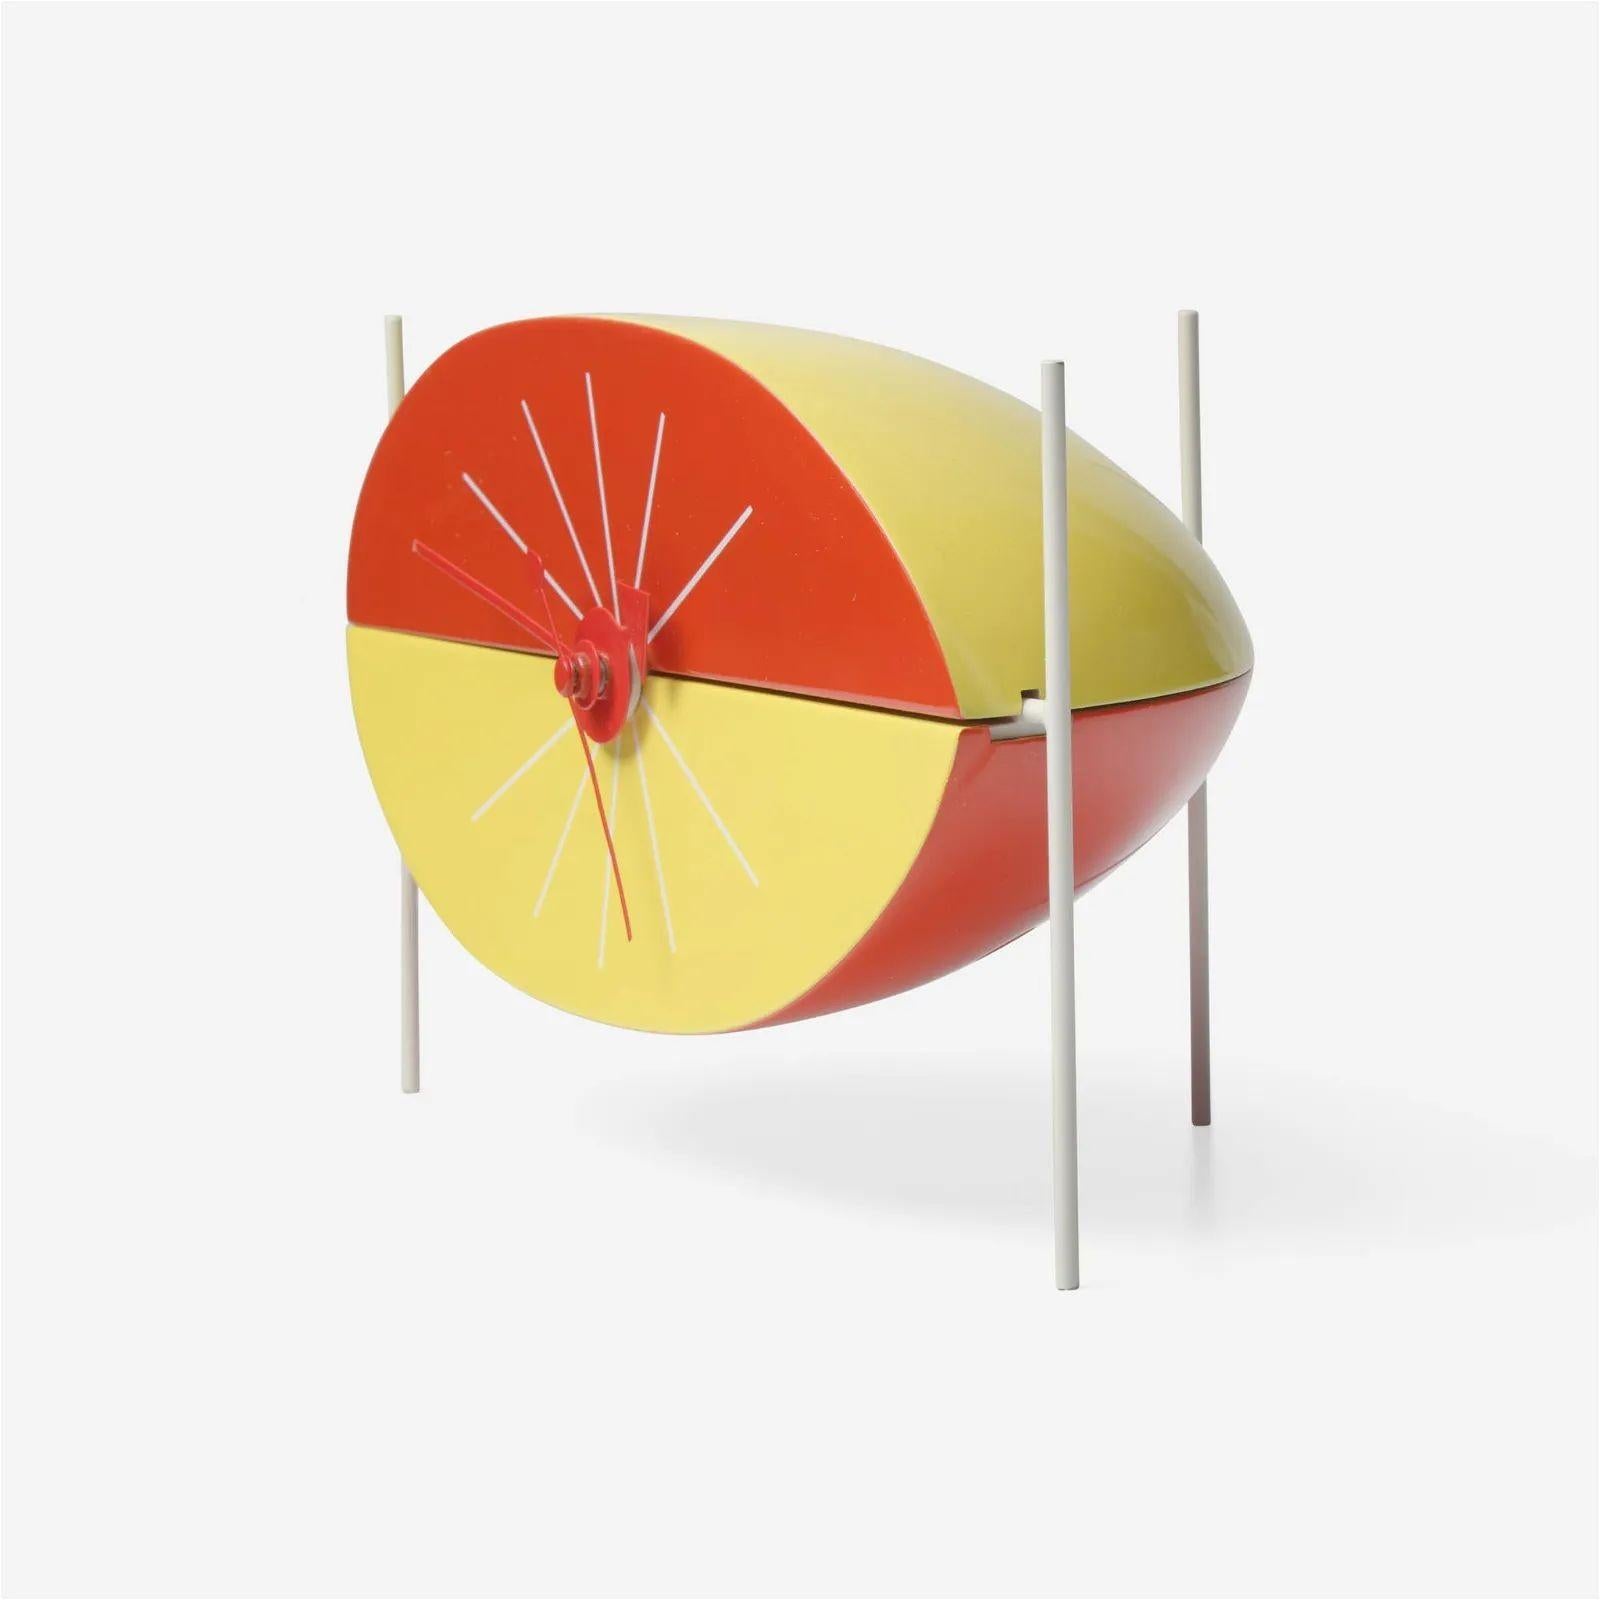 George Nelson (American, 1908-1986) Table Clock for Howard Miller, Vitra Design Museum, Poland/Germany, designed 1949-1954
 
Watermelon clock with red and yellow lacquered wood body, red hands and applied Vitra Design Museum labels having